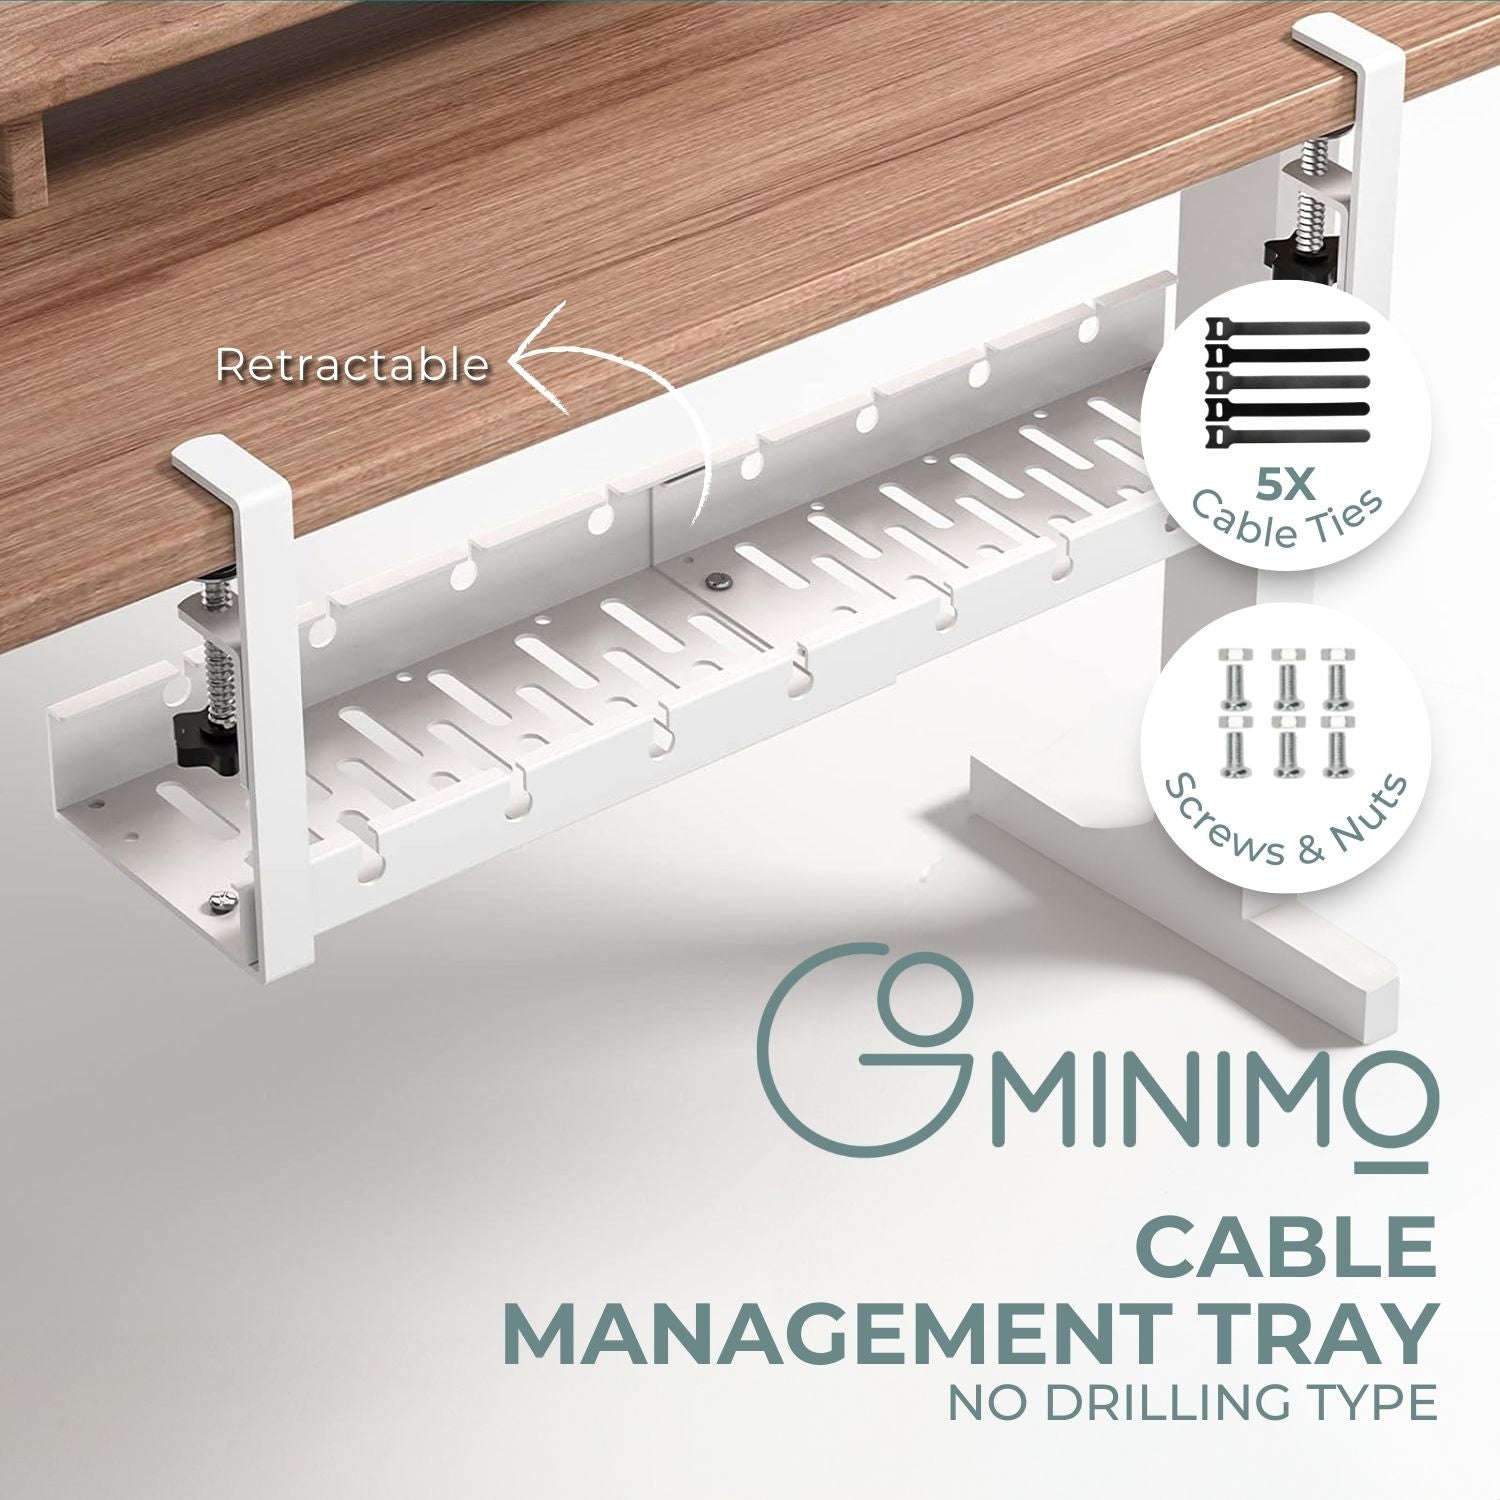 GOMINIMO Retractable Cable Management Tray- No Drilling Type (White) GO-CMT-103-KX